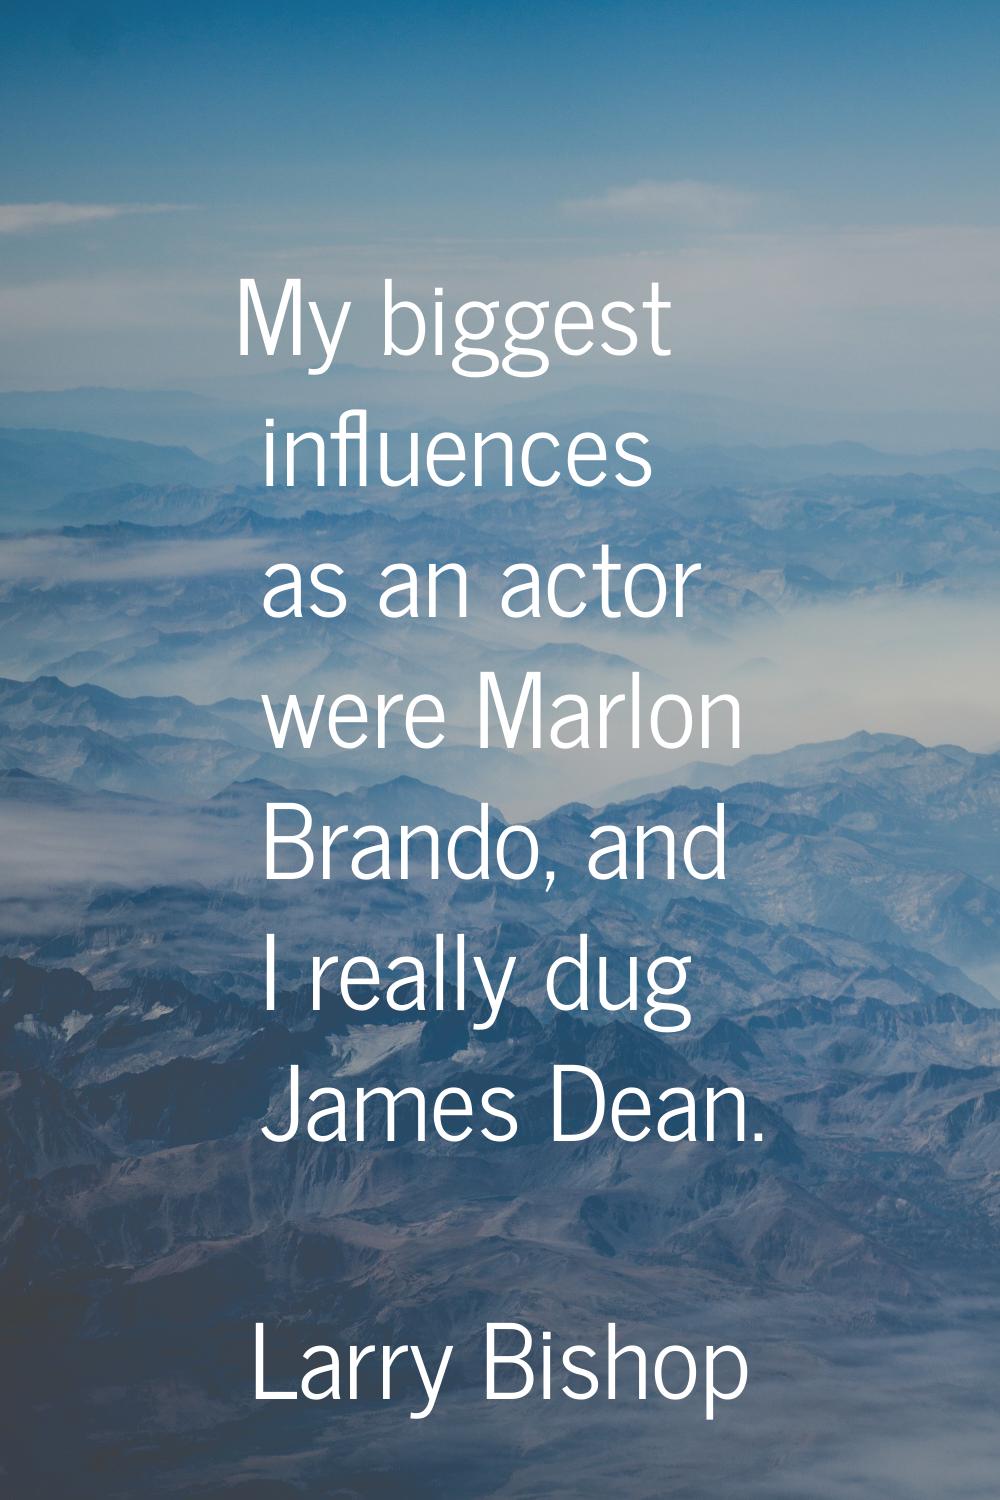 My biggest influences as an actor were Marlon Brando, and I really dug James Dean.